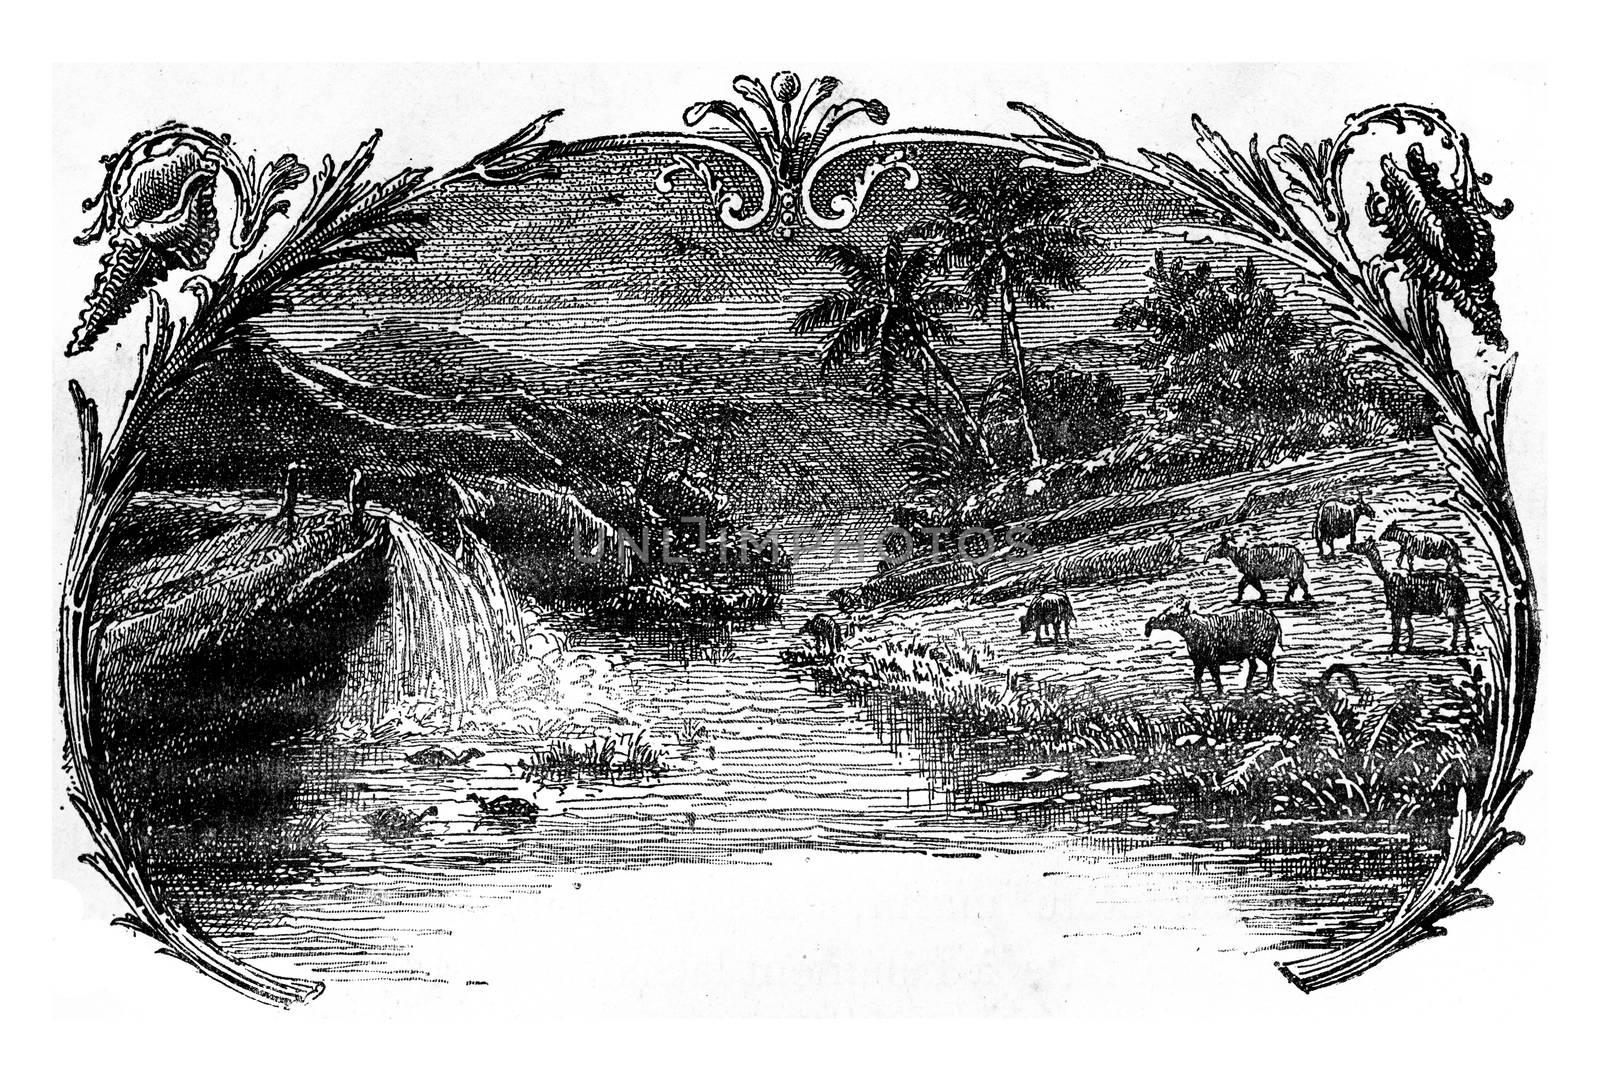 The Eocene period, vintage engraving. by Morphart